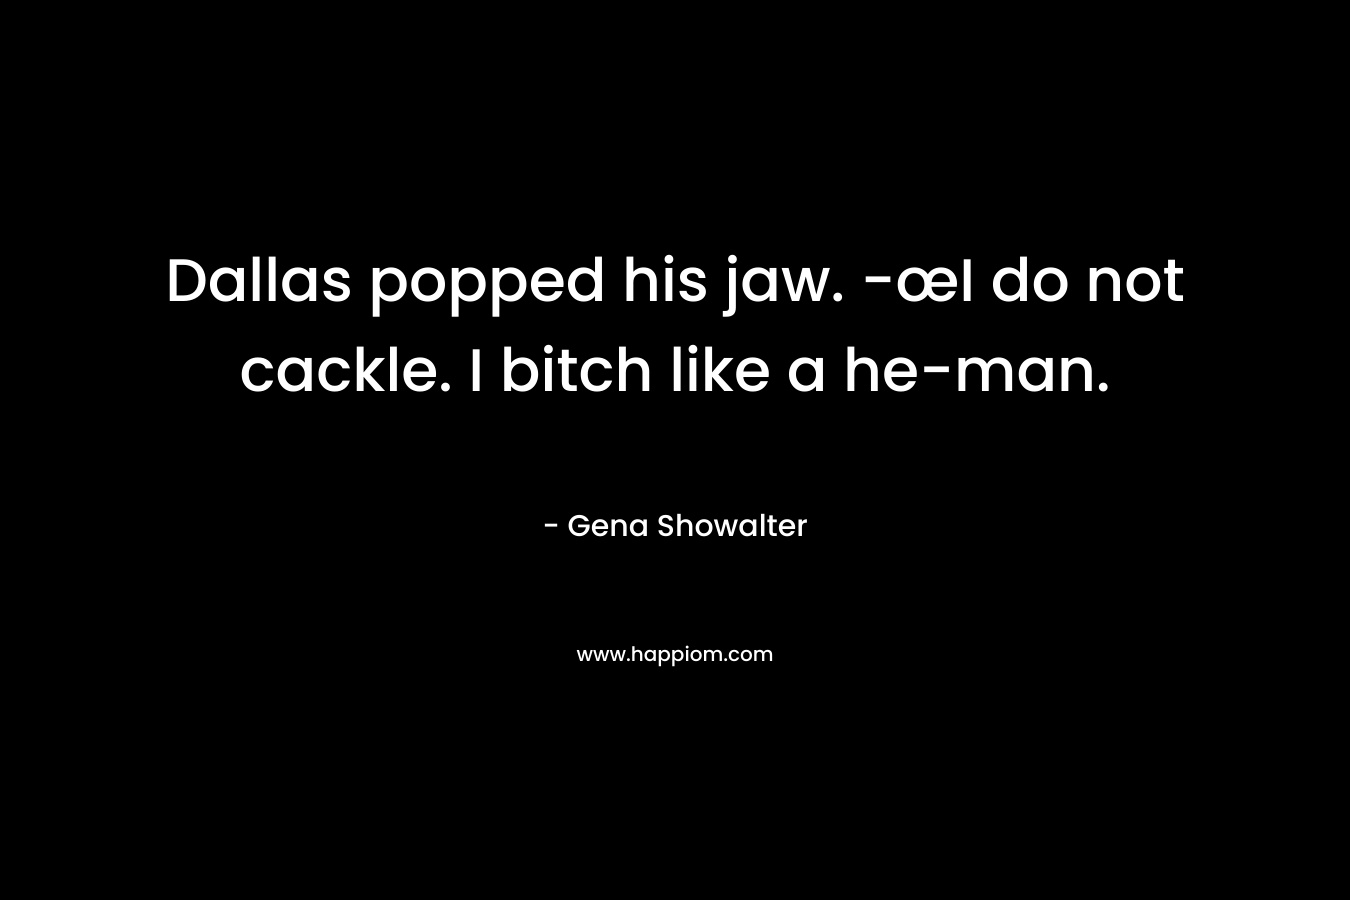 Dallas popped his jaw. -œI do not cackle. I bitch like a he-man. – Gena Showalter